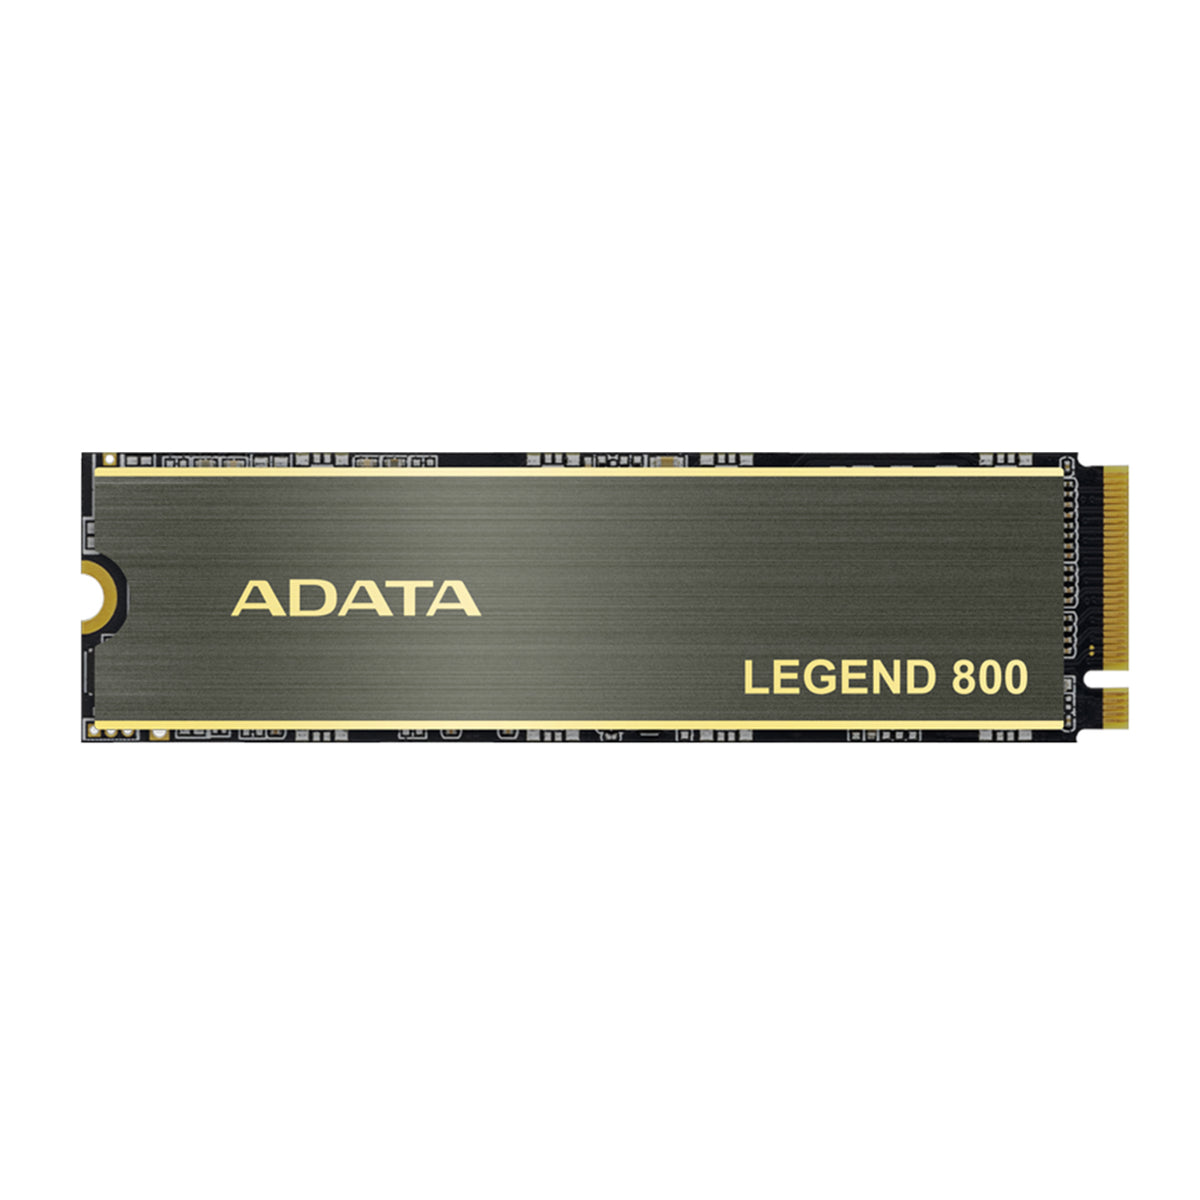 ADATA 1TB SSD Legend 800, NVMe PCIe Gen4 x 4 M.2 2280 Internal Solid State Drive, Speed up to 3,500MB/s, Storage for PC, High Endurance with 3D NAND